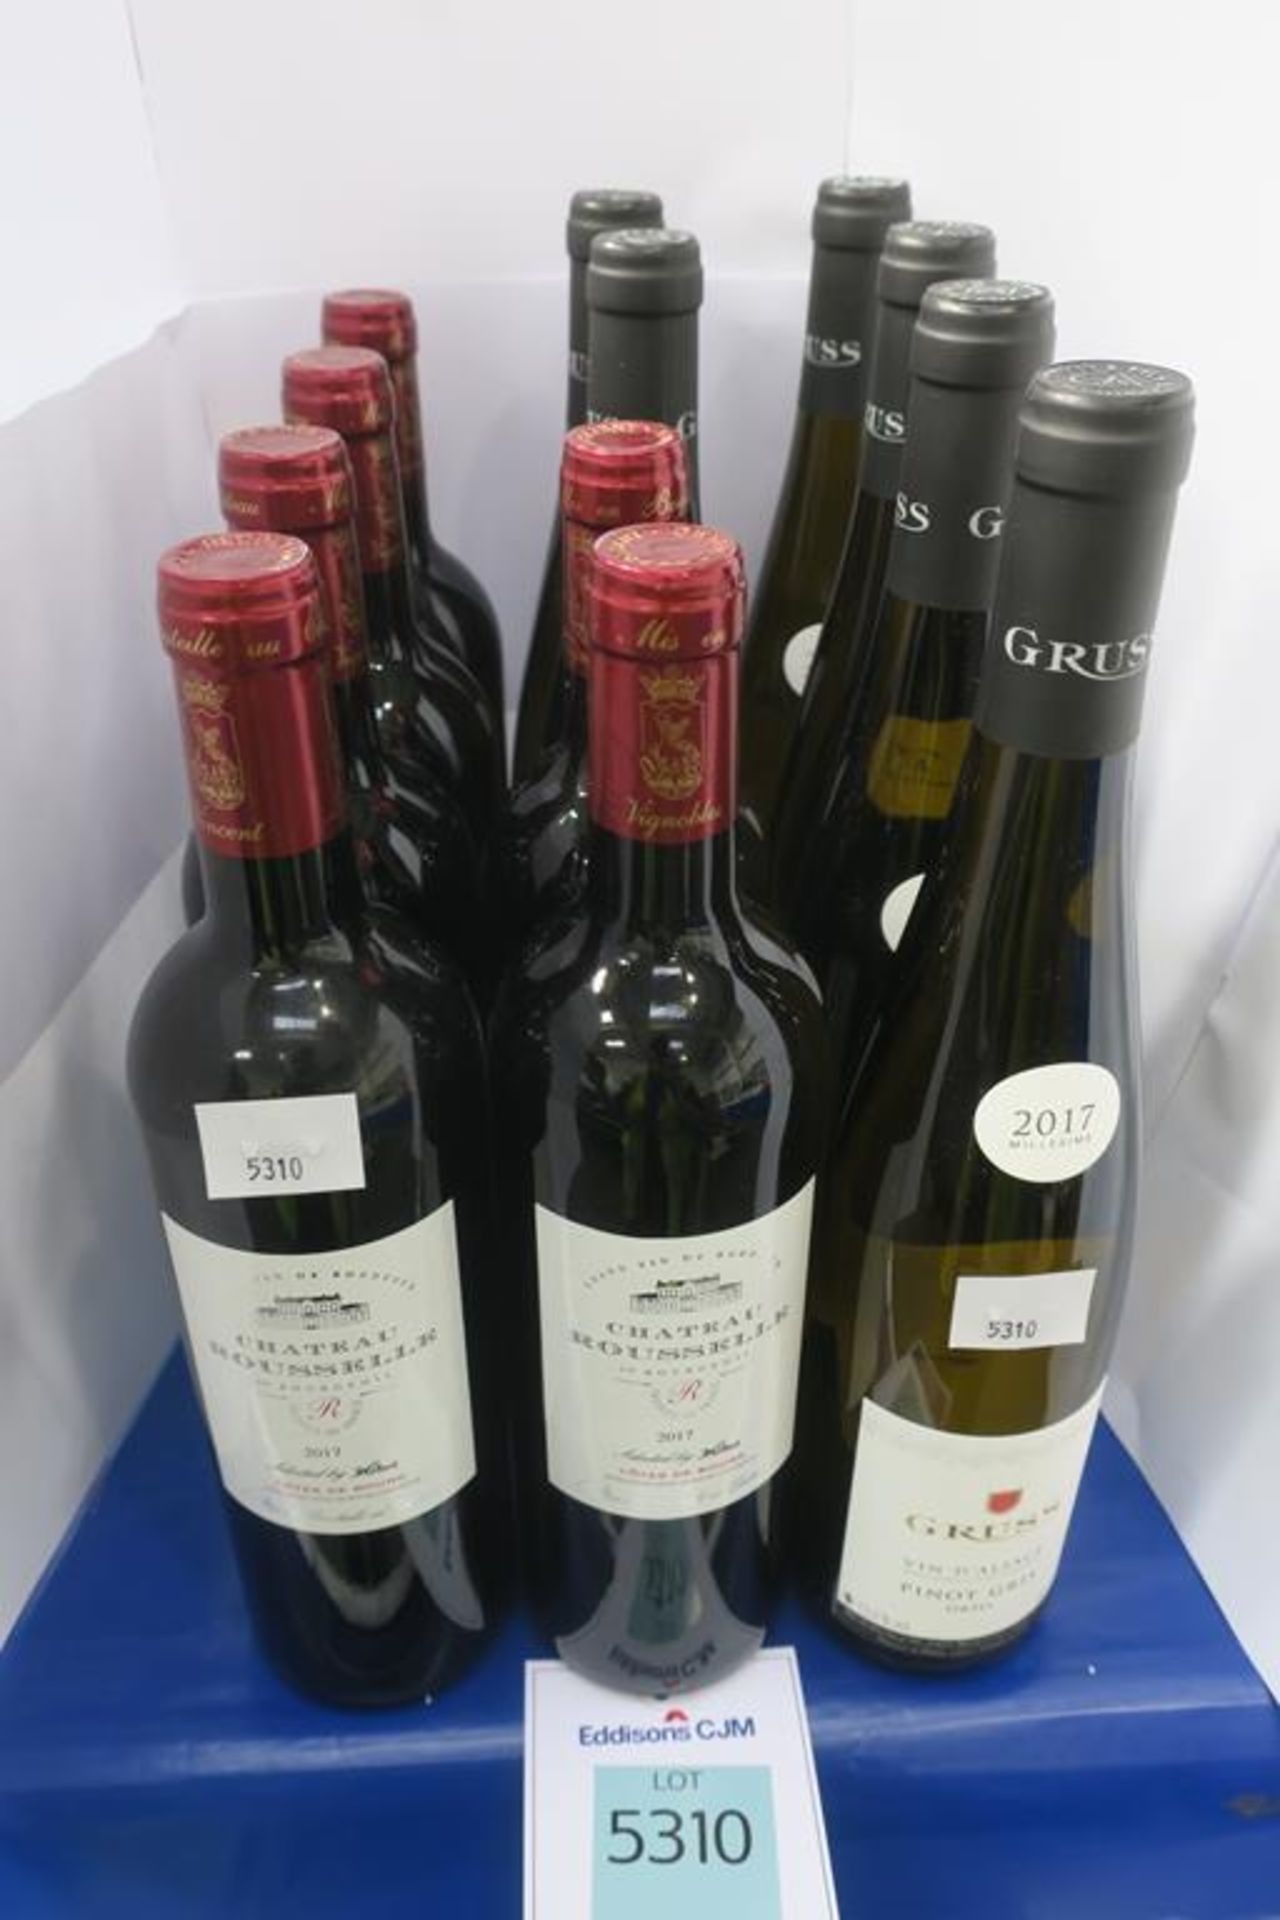 Domaine Gruss and Chateu Rousselle Wine